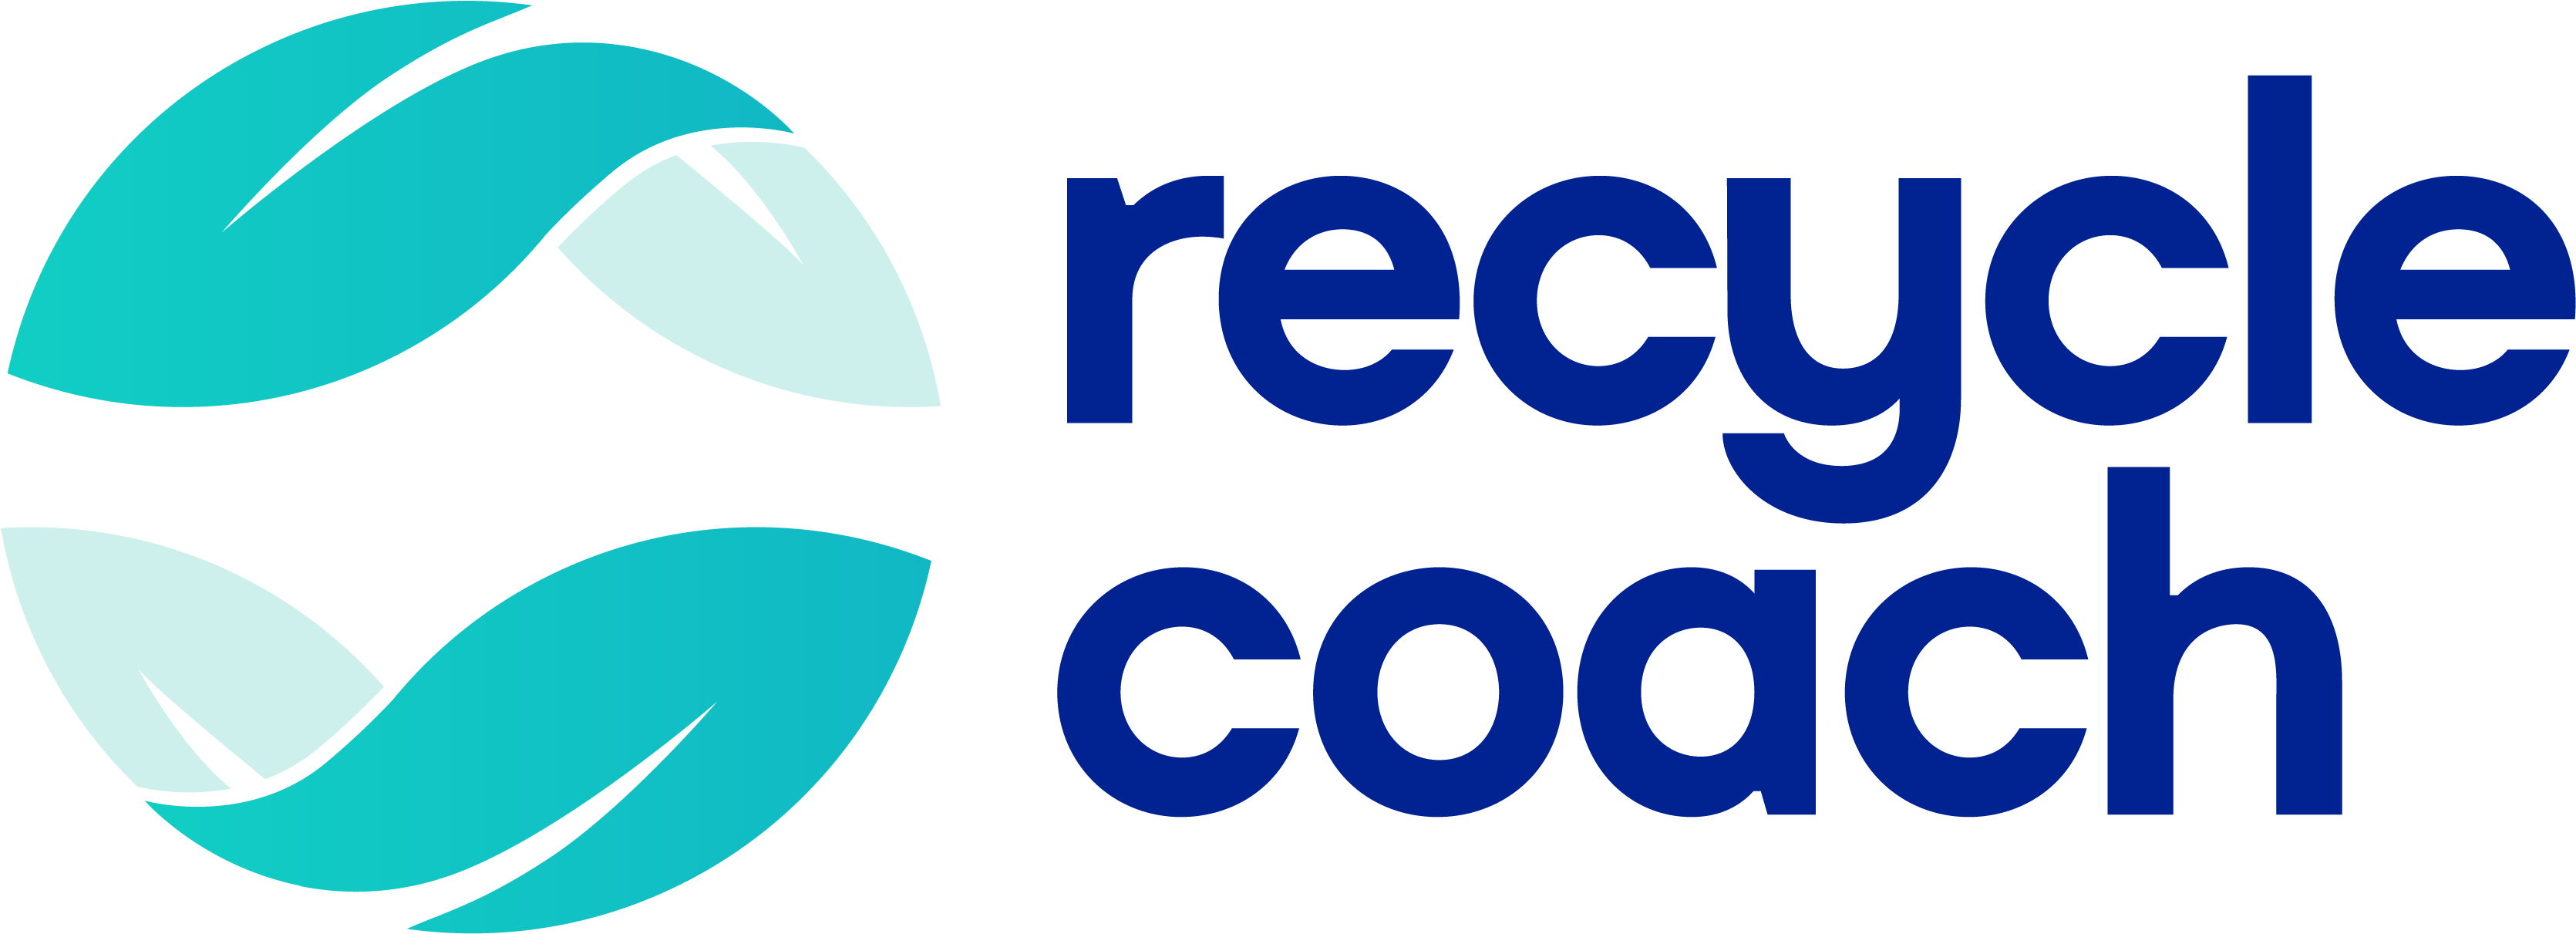 Recycle Coach, Hd Png Download